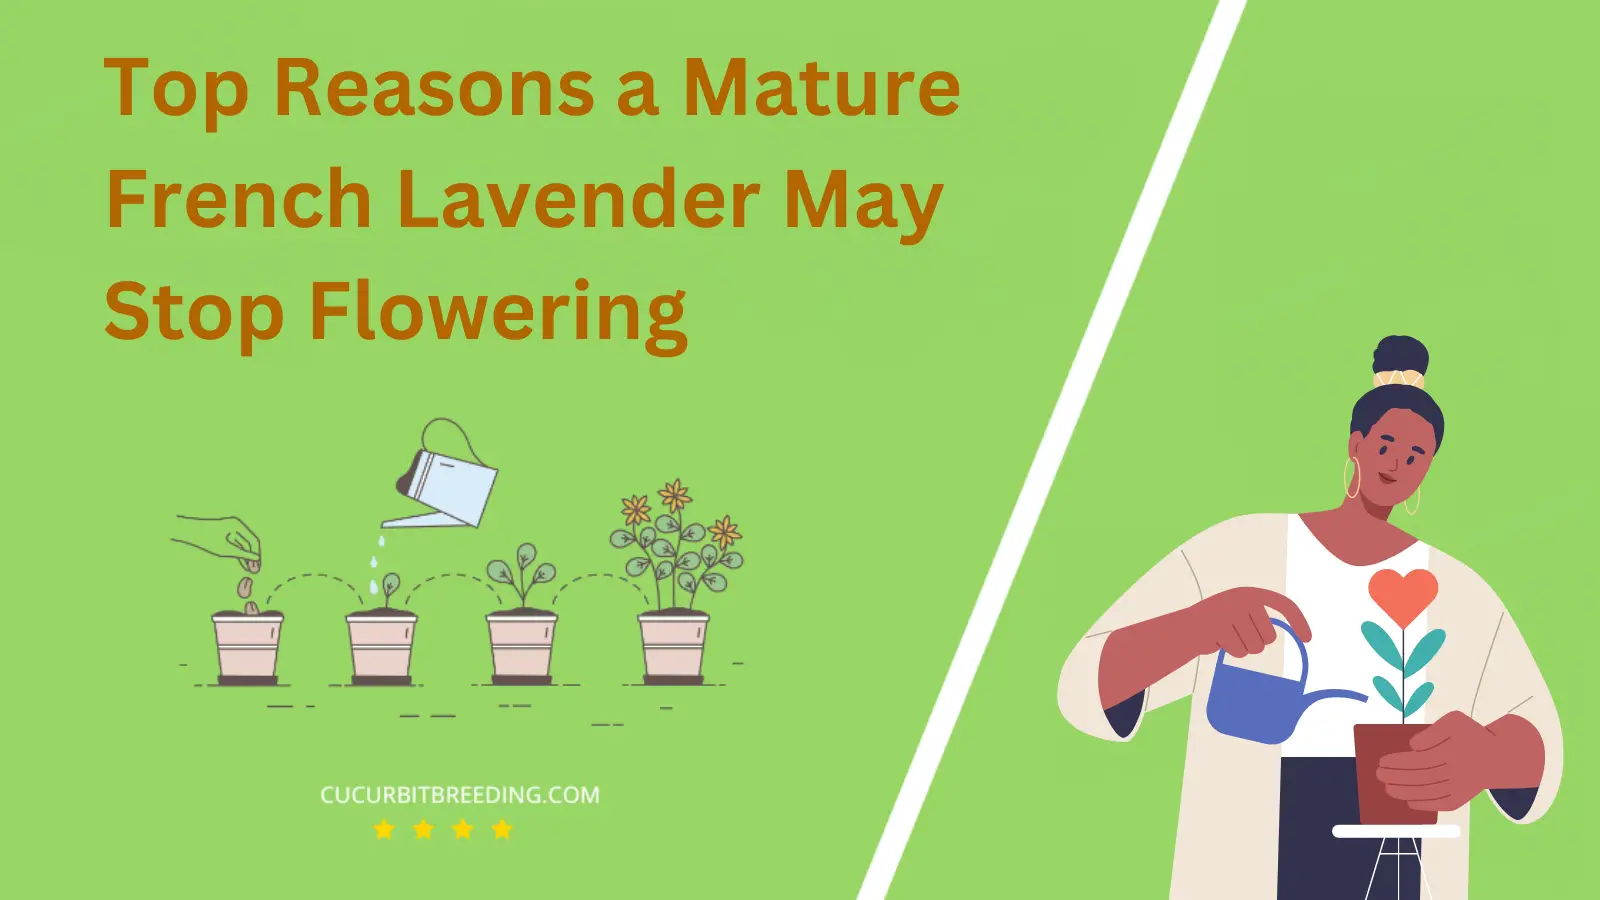 Top Reasons a Mature French Lavender May Stop Flowering